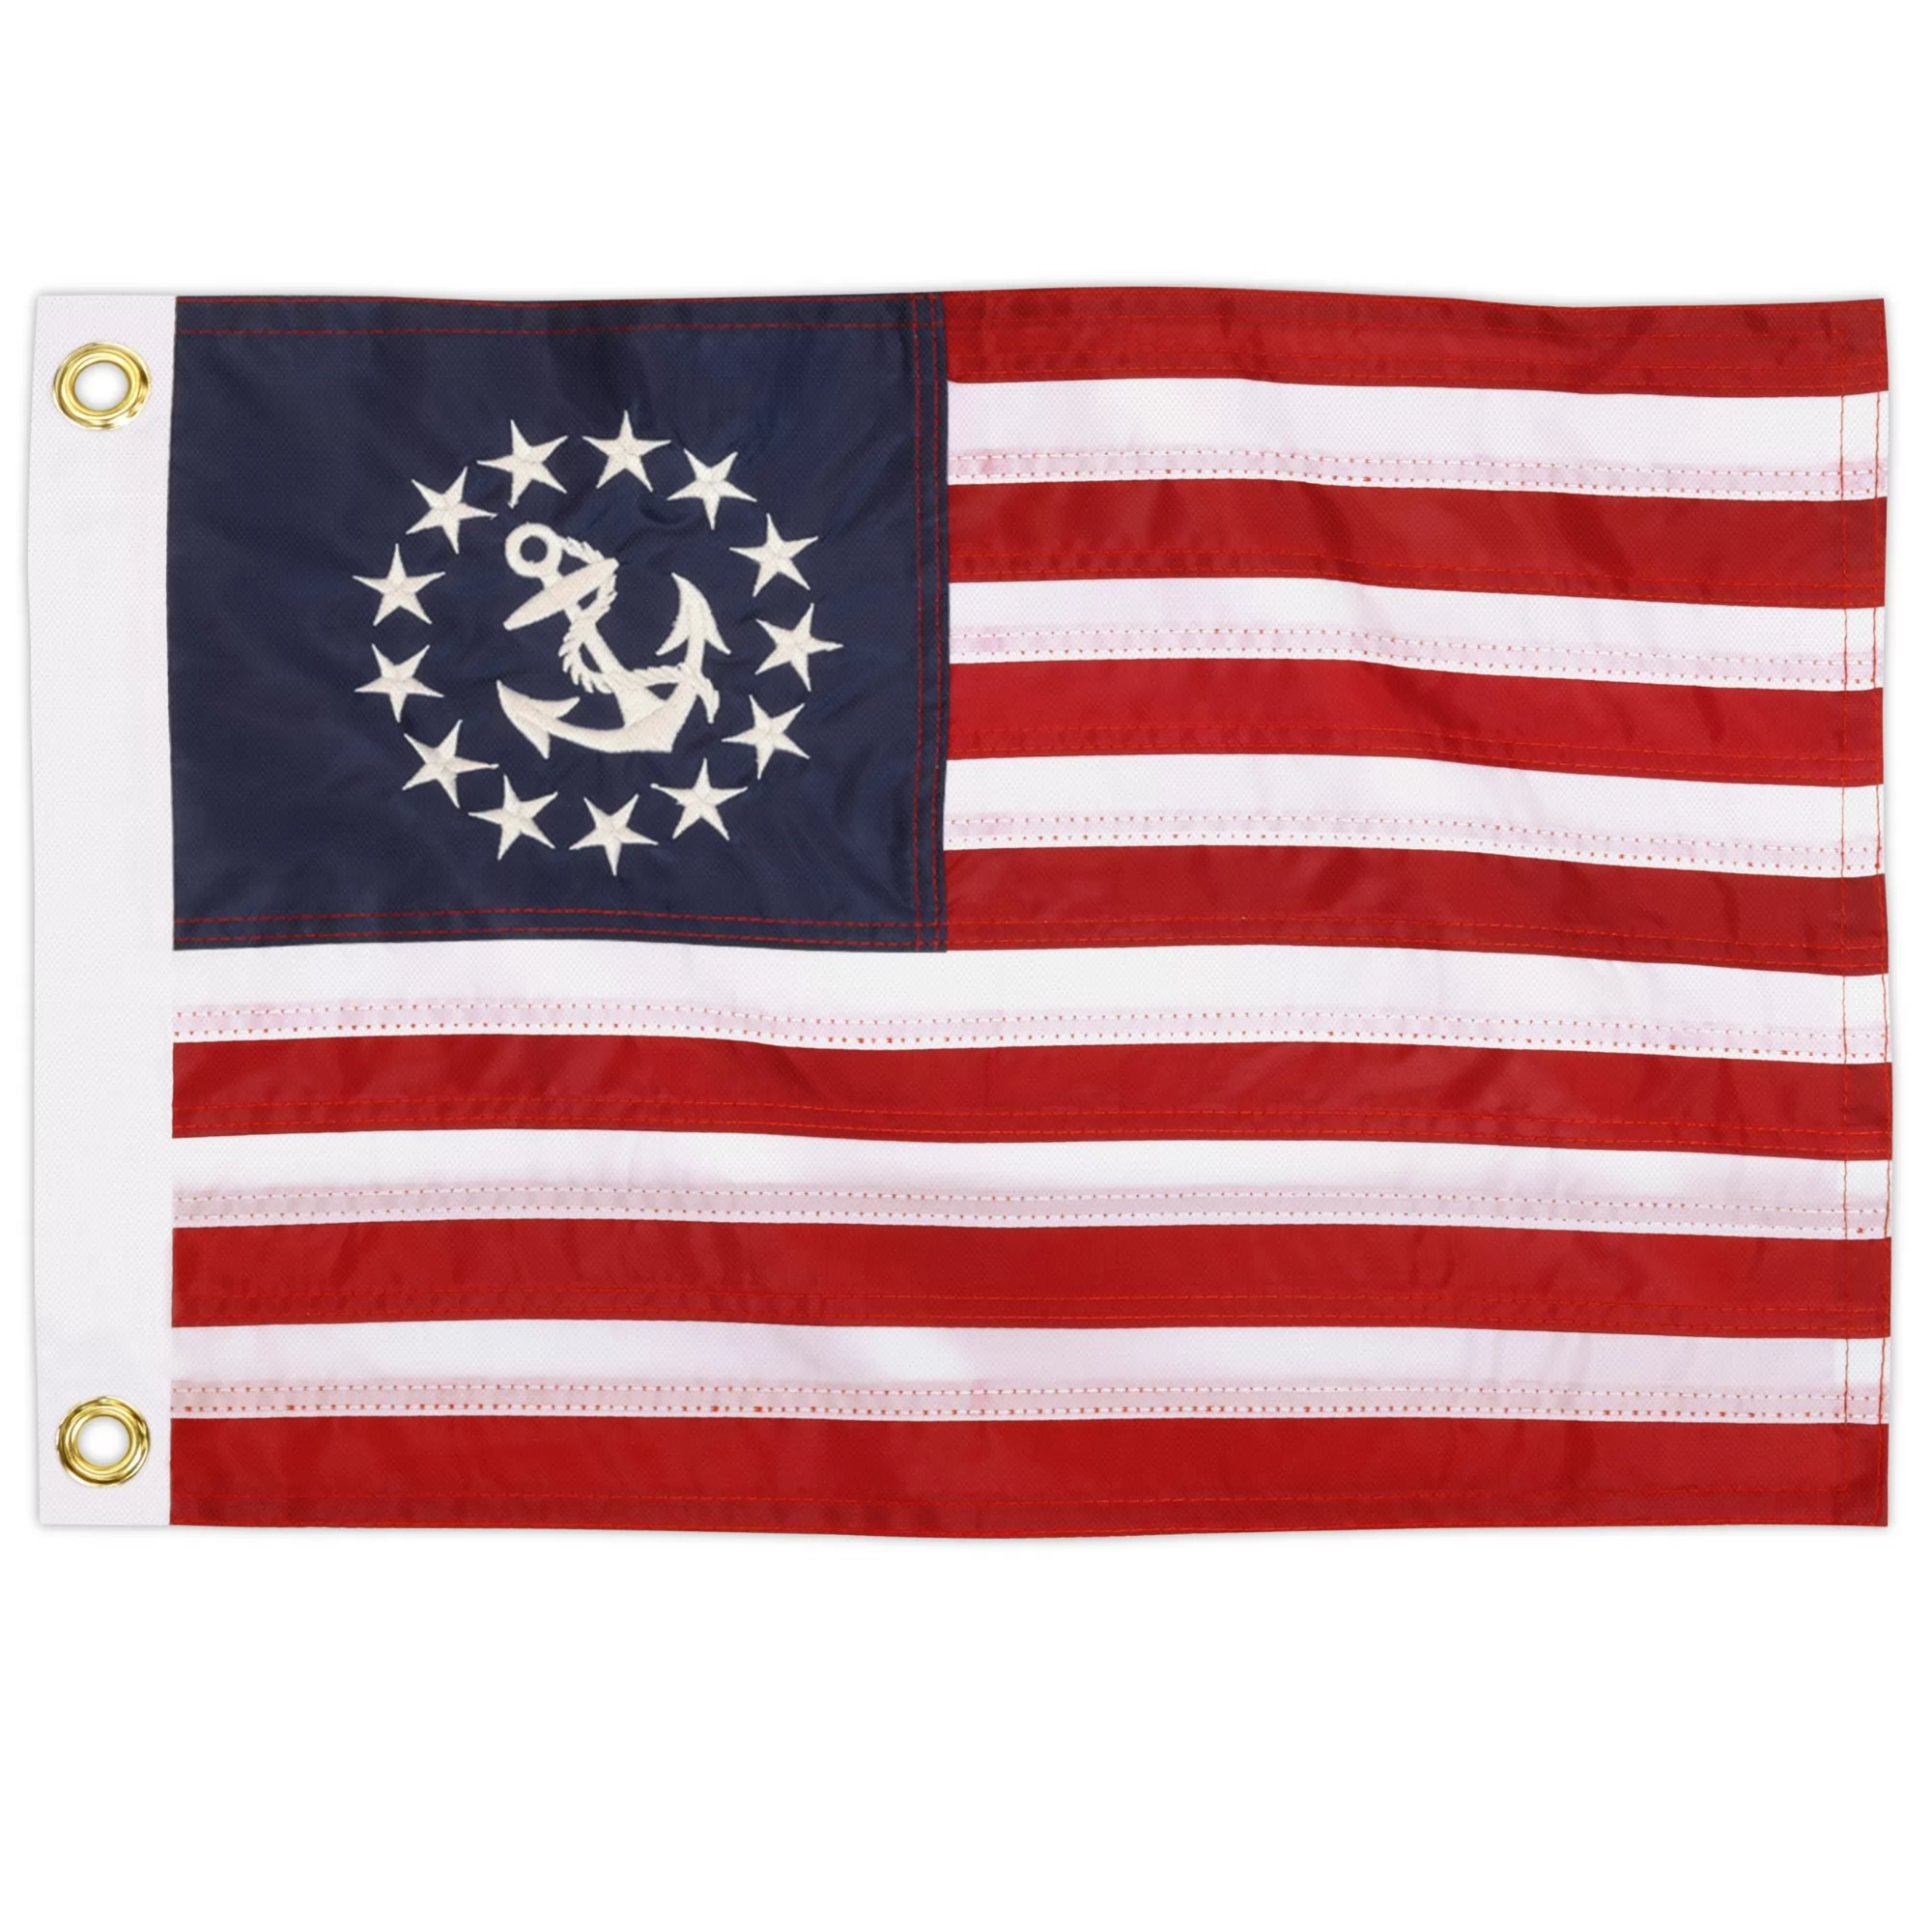 12″x18″ United States Official Yacht Ensign Flag